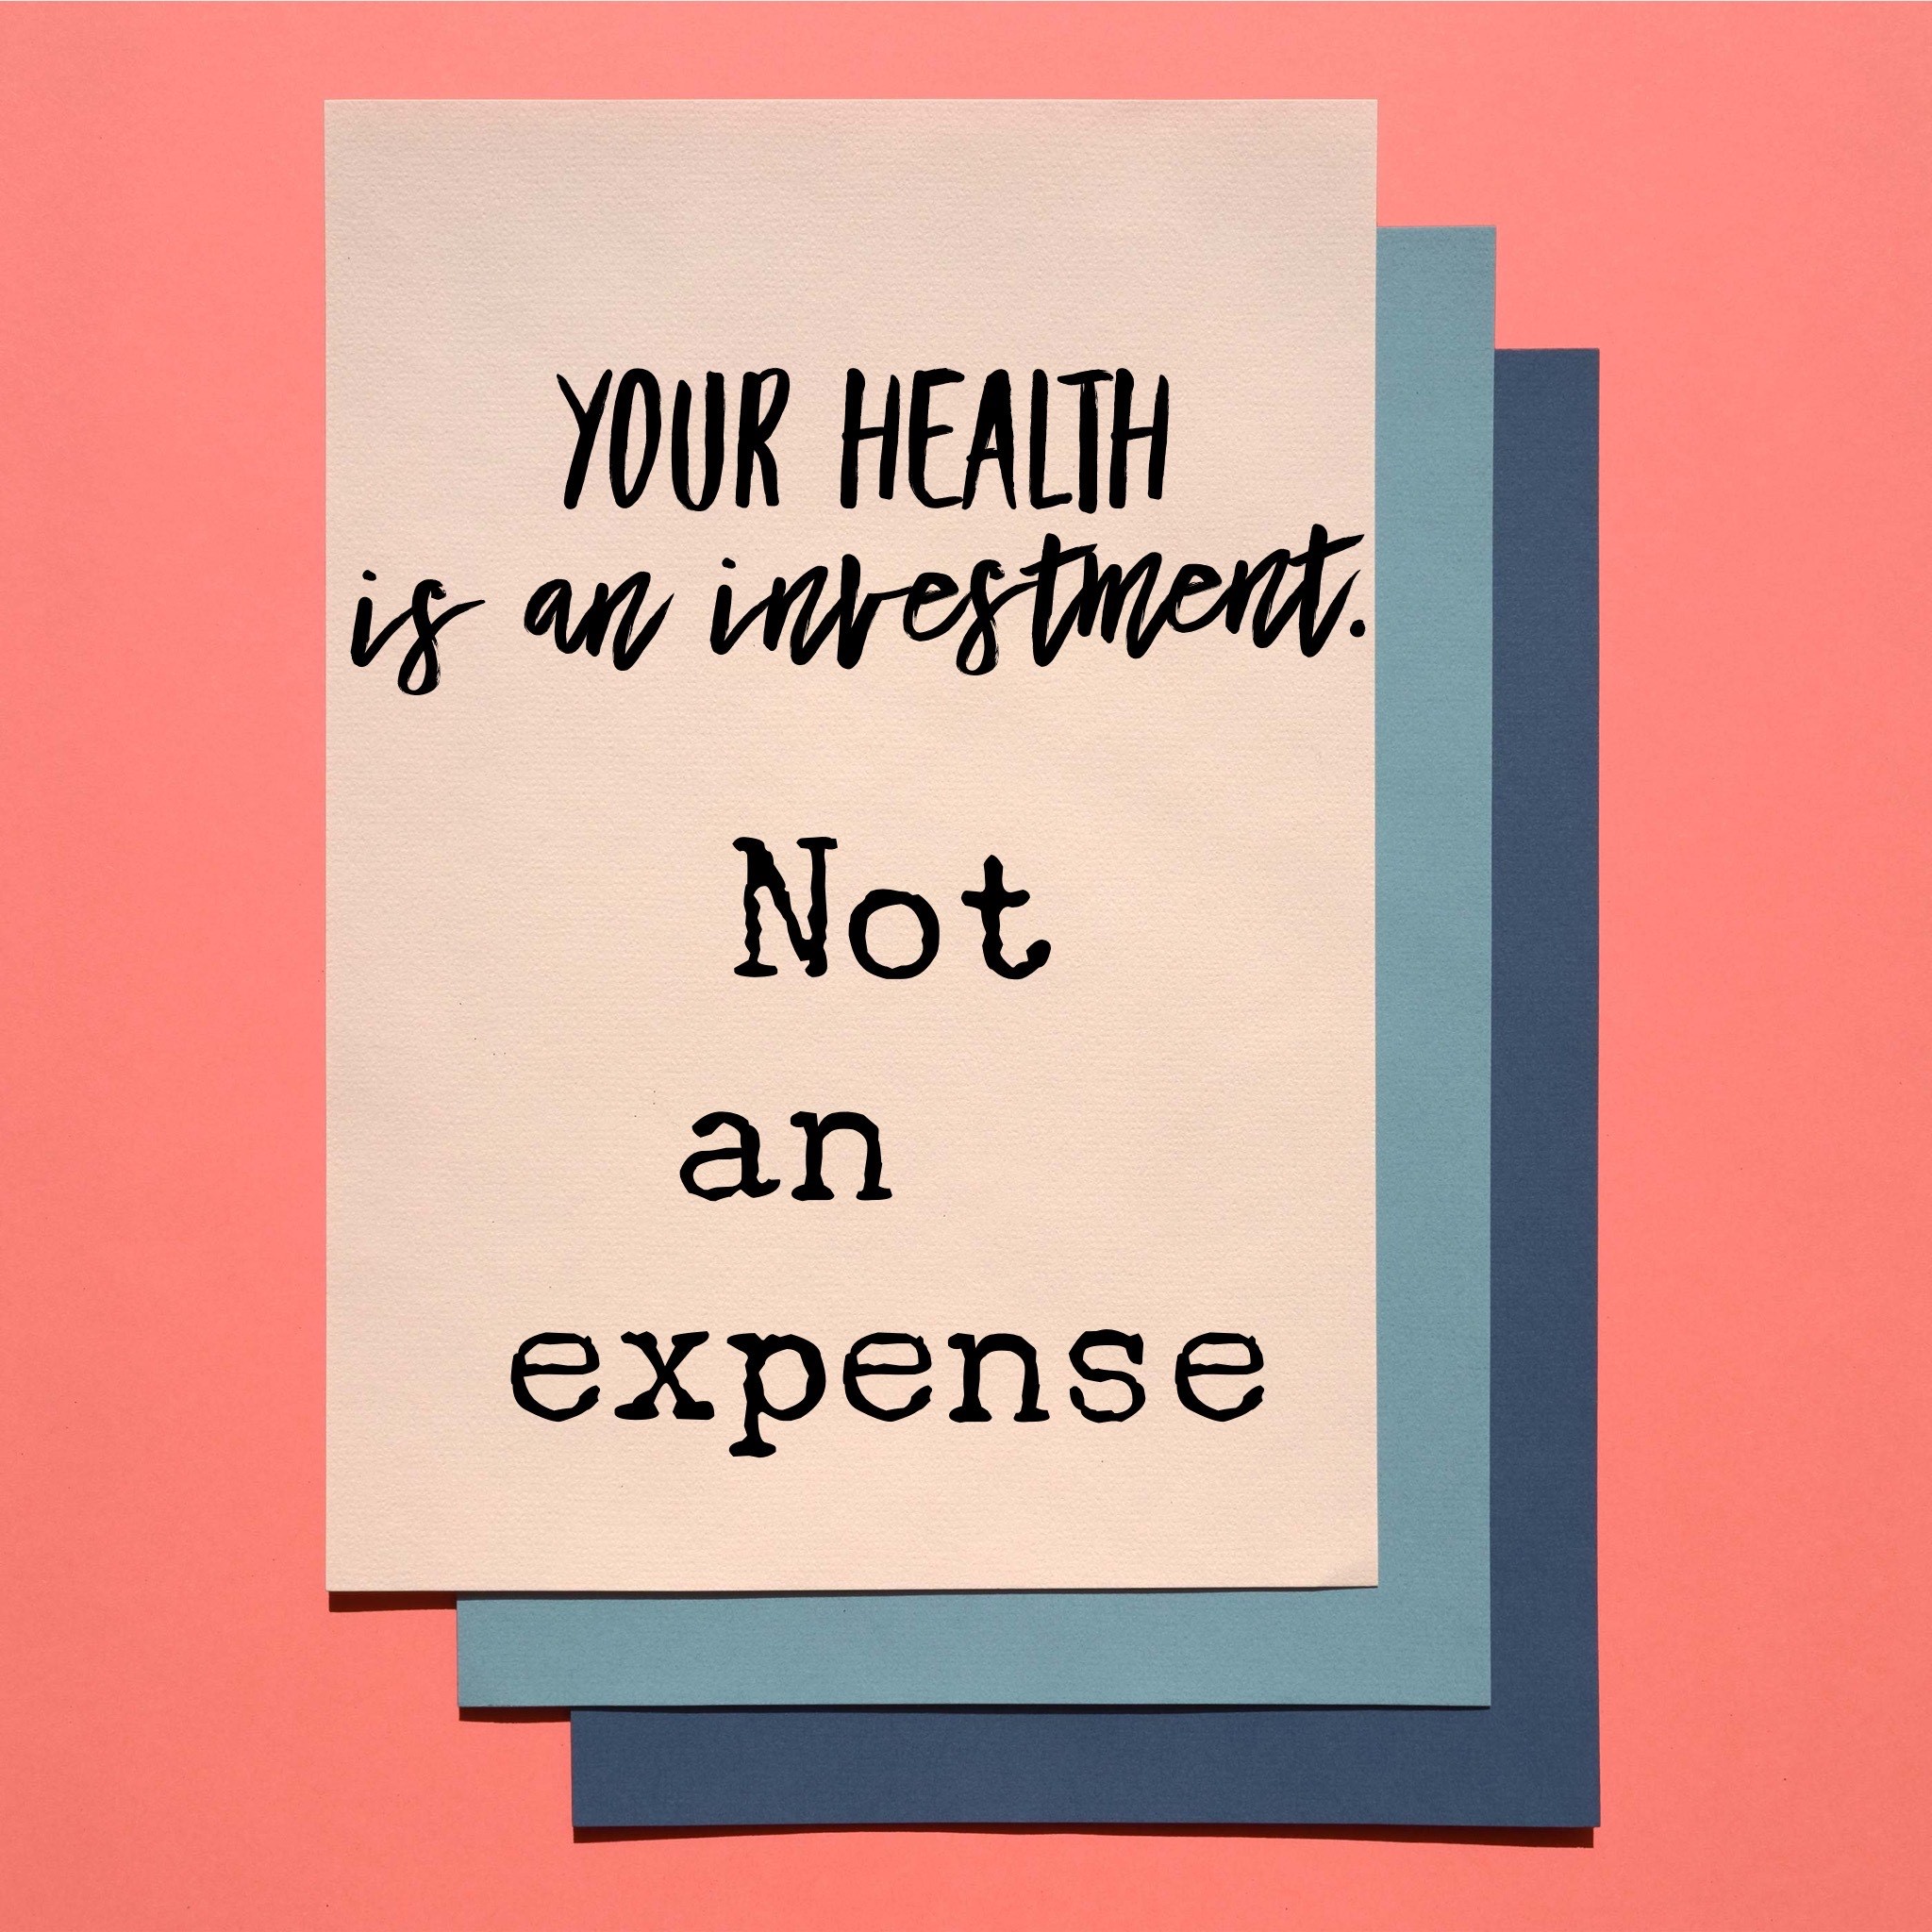 Your Health is an investment, not an expense.